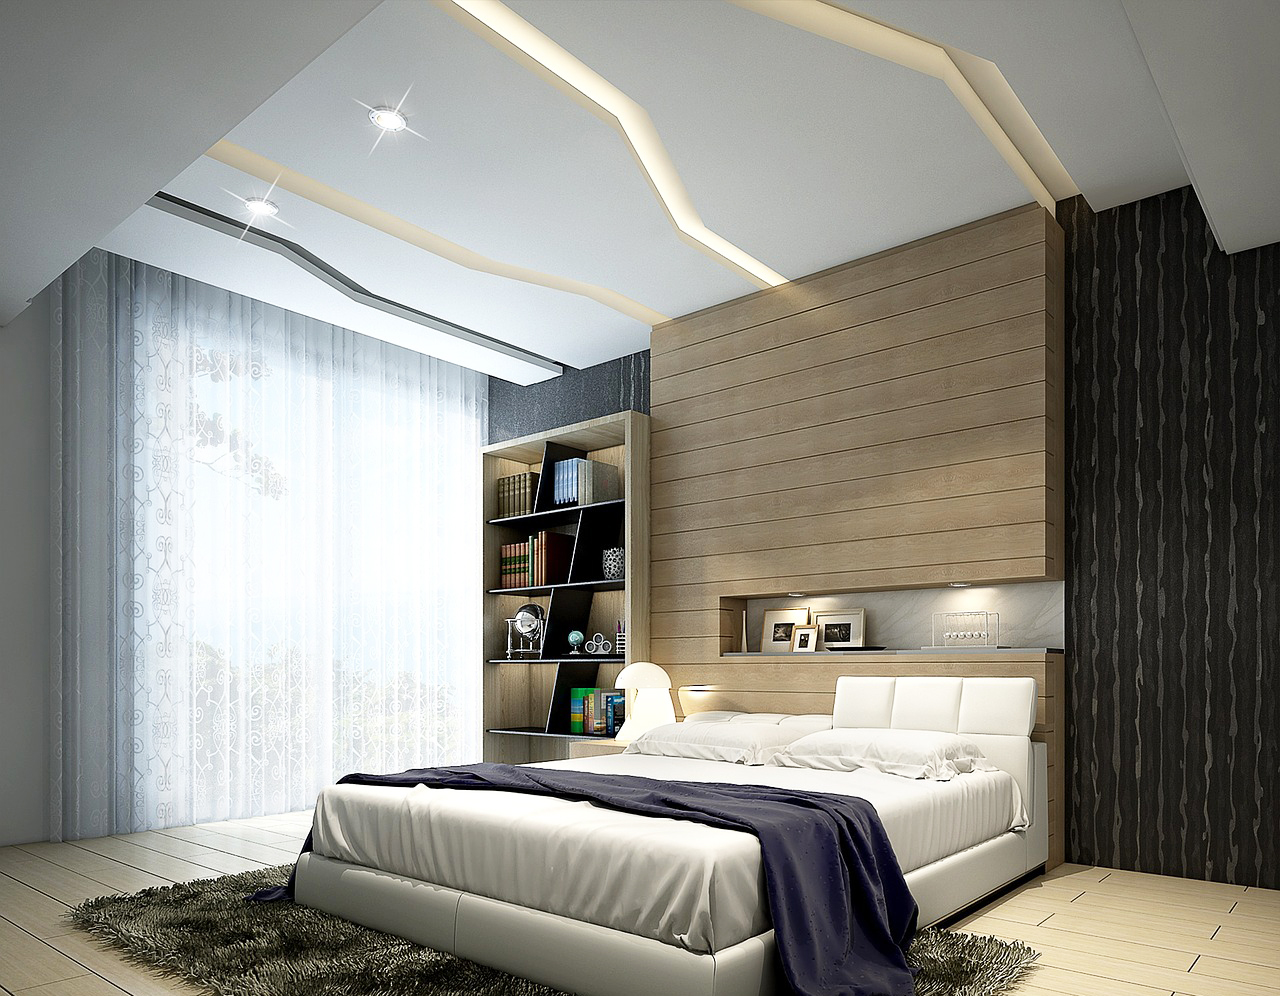 Simple Bedroom Roof Design with Simple Decor